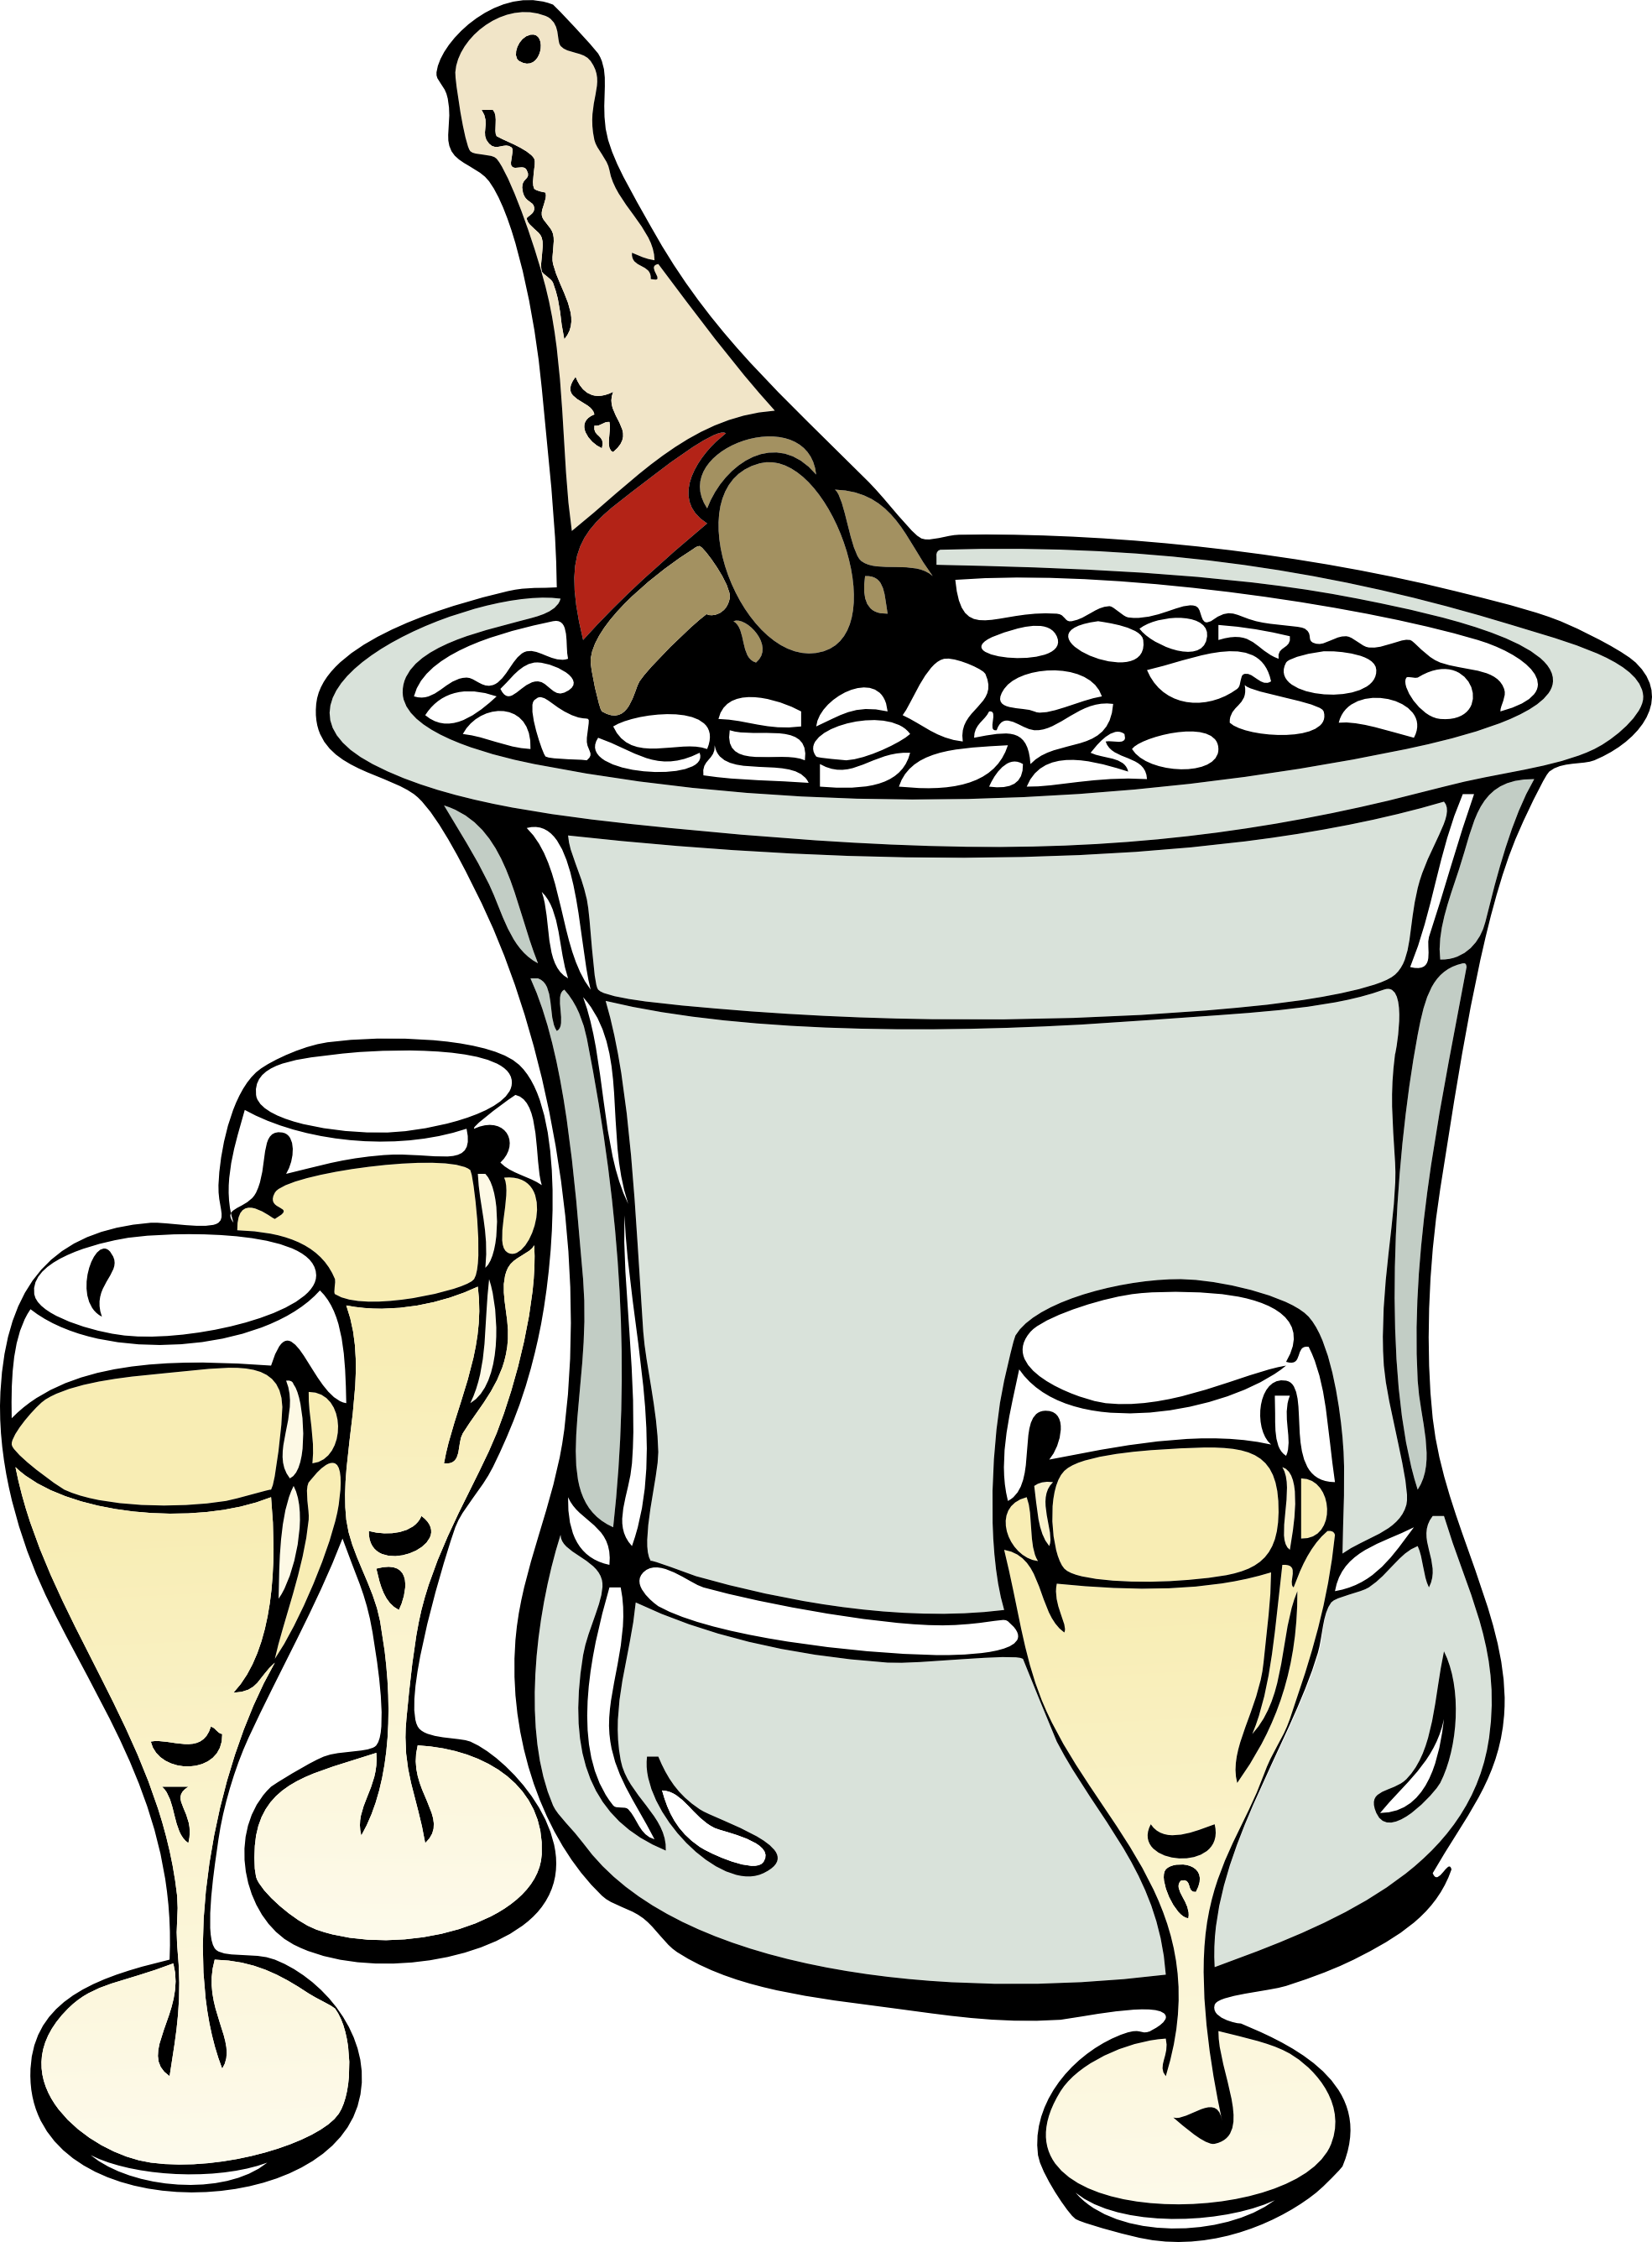 Free Champagne On Ice - Custom Champagne On Ice Sticker (1969x2672)